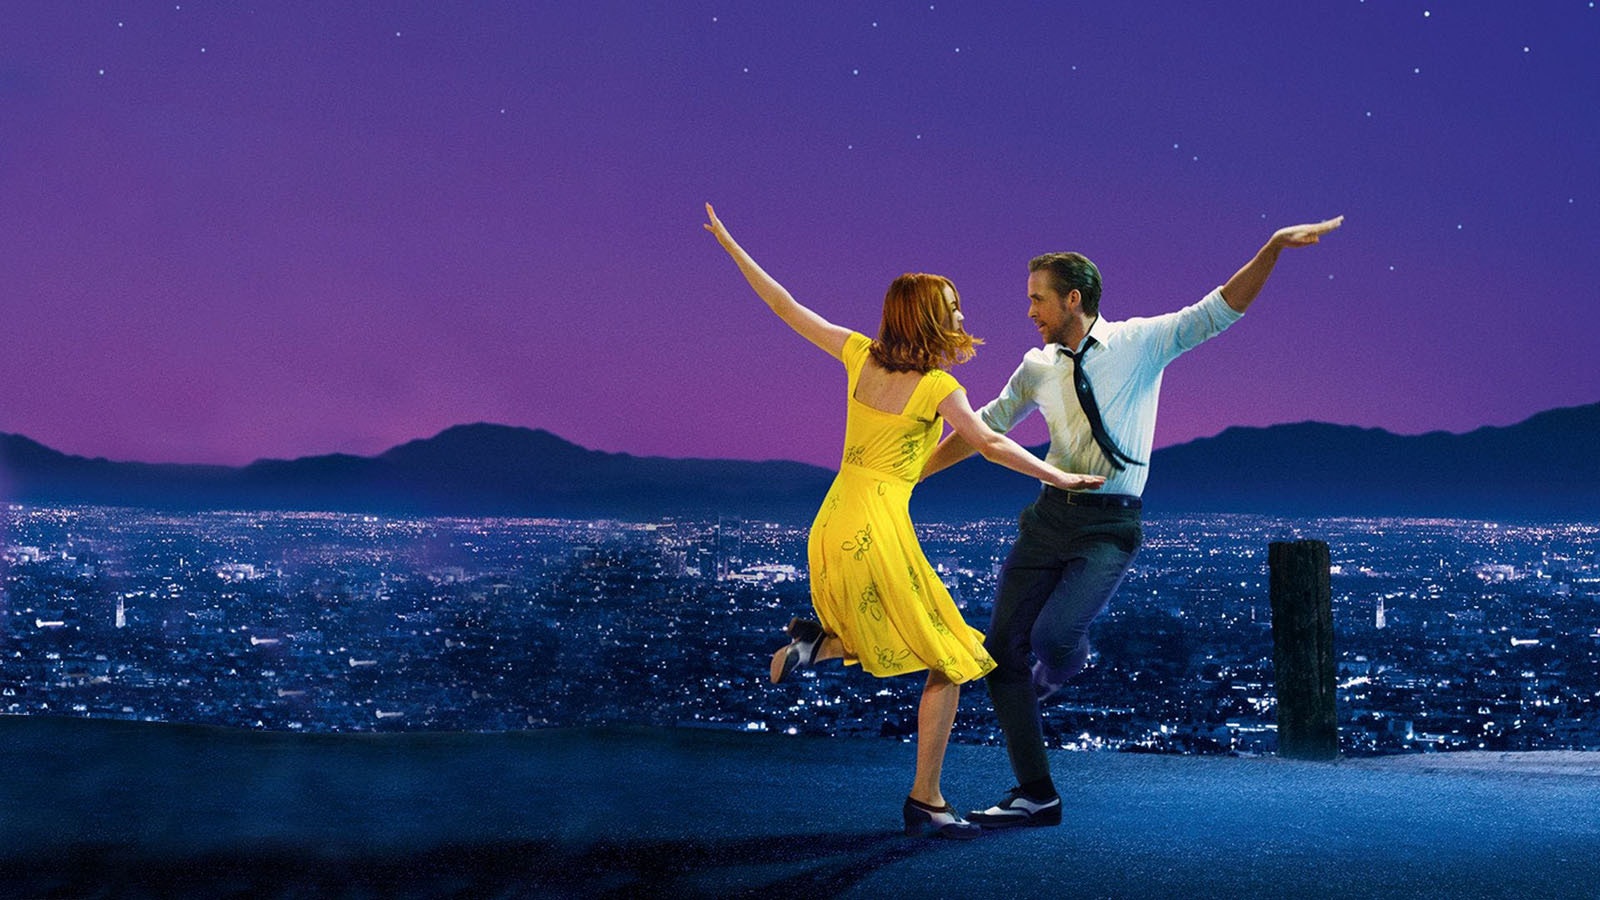 Emma Stone and Ryan Gosling in "La La Land," a 2016 film that was nominated for 14 Academy Awards and won six. A Ucross residency led Damien Chazelle to create the script for the film.